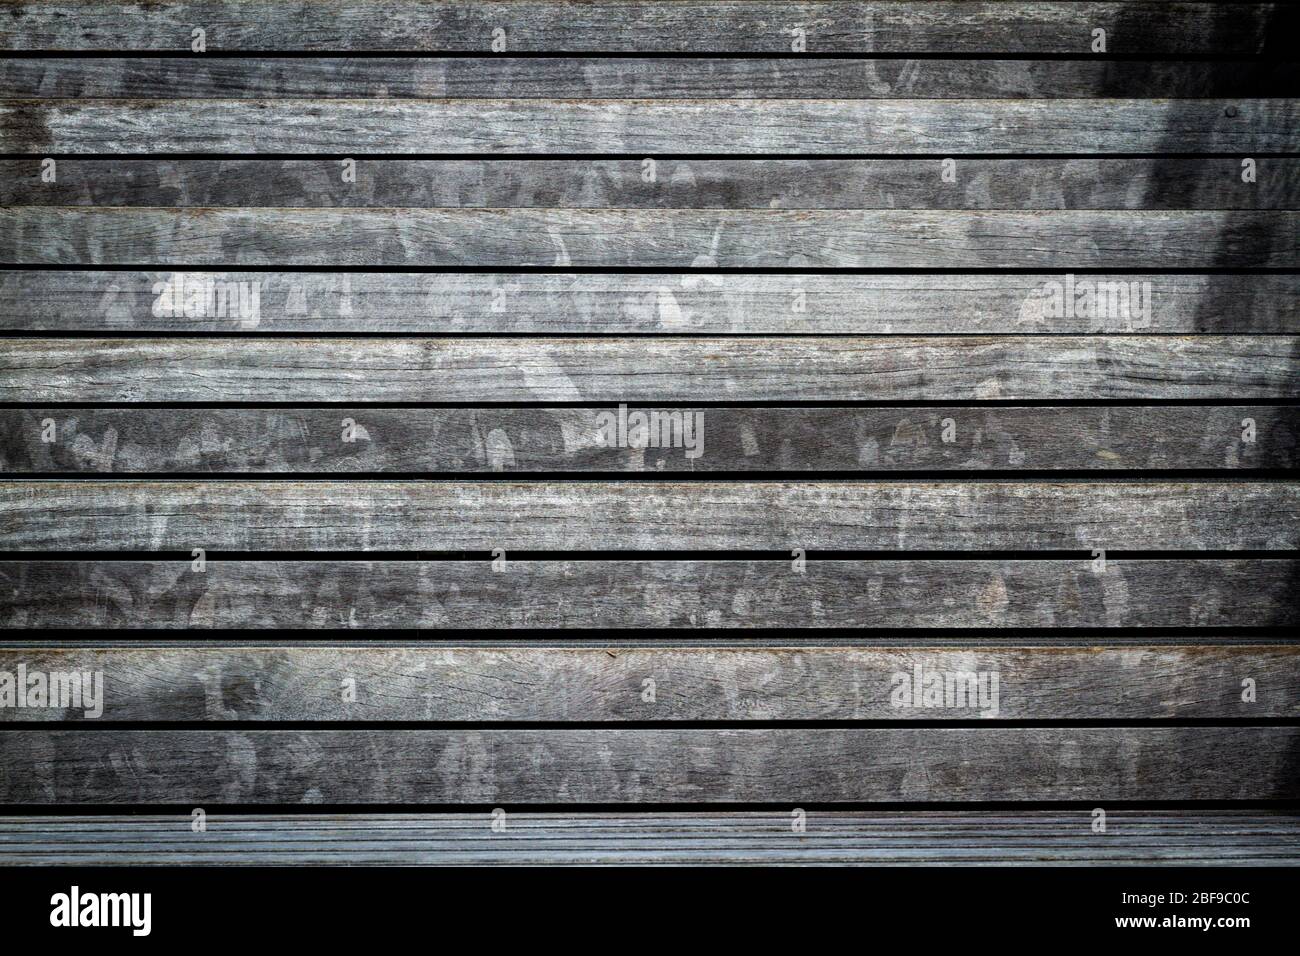 Wooden stairs receding Stock Photo